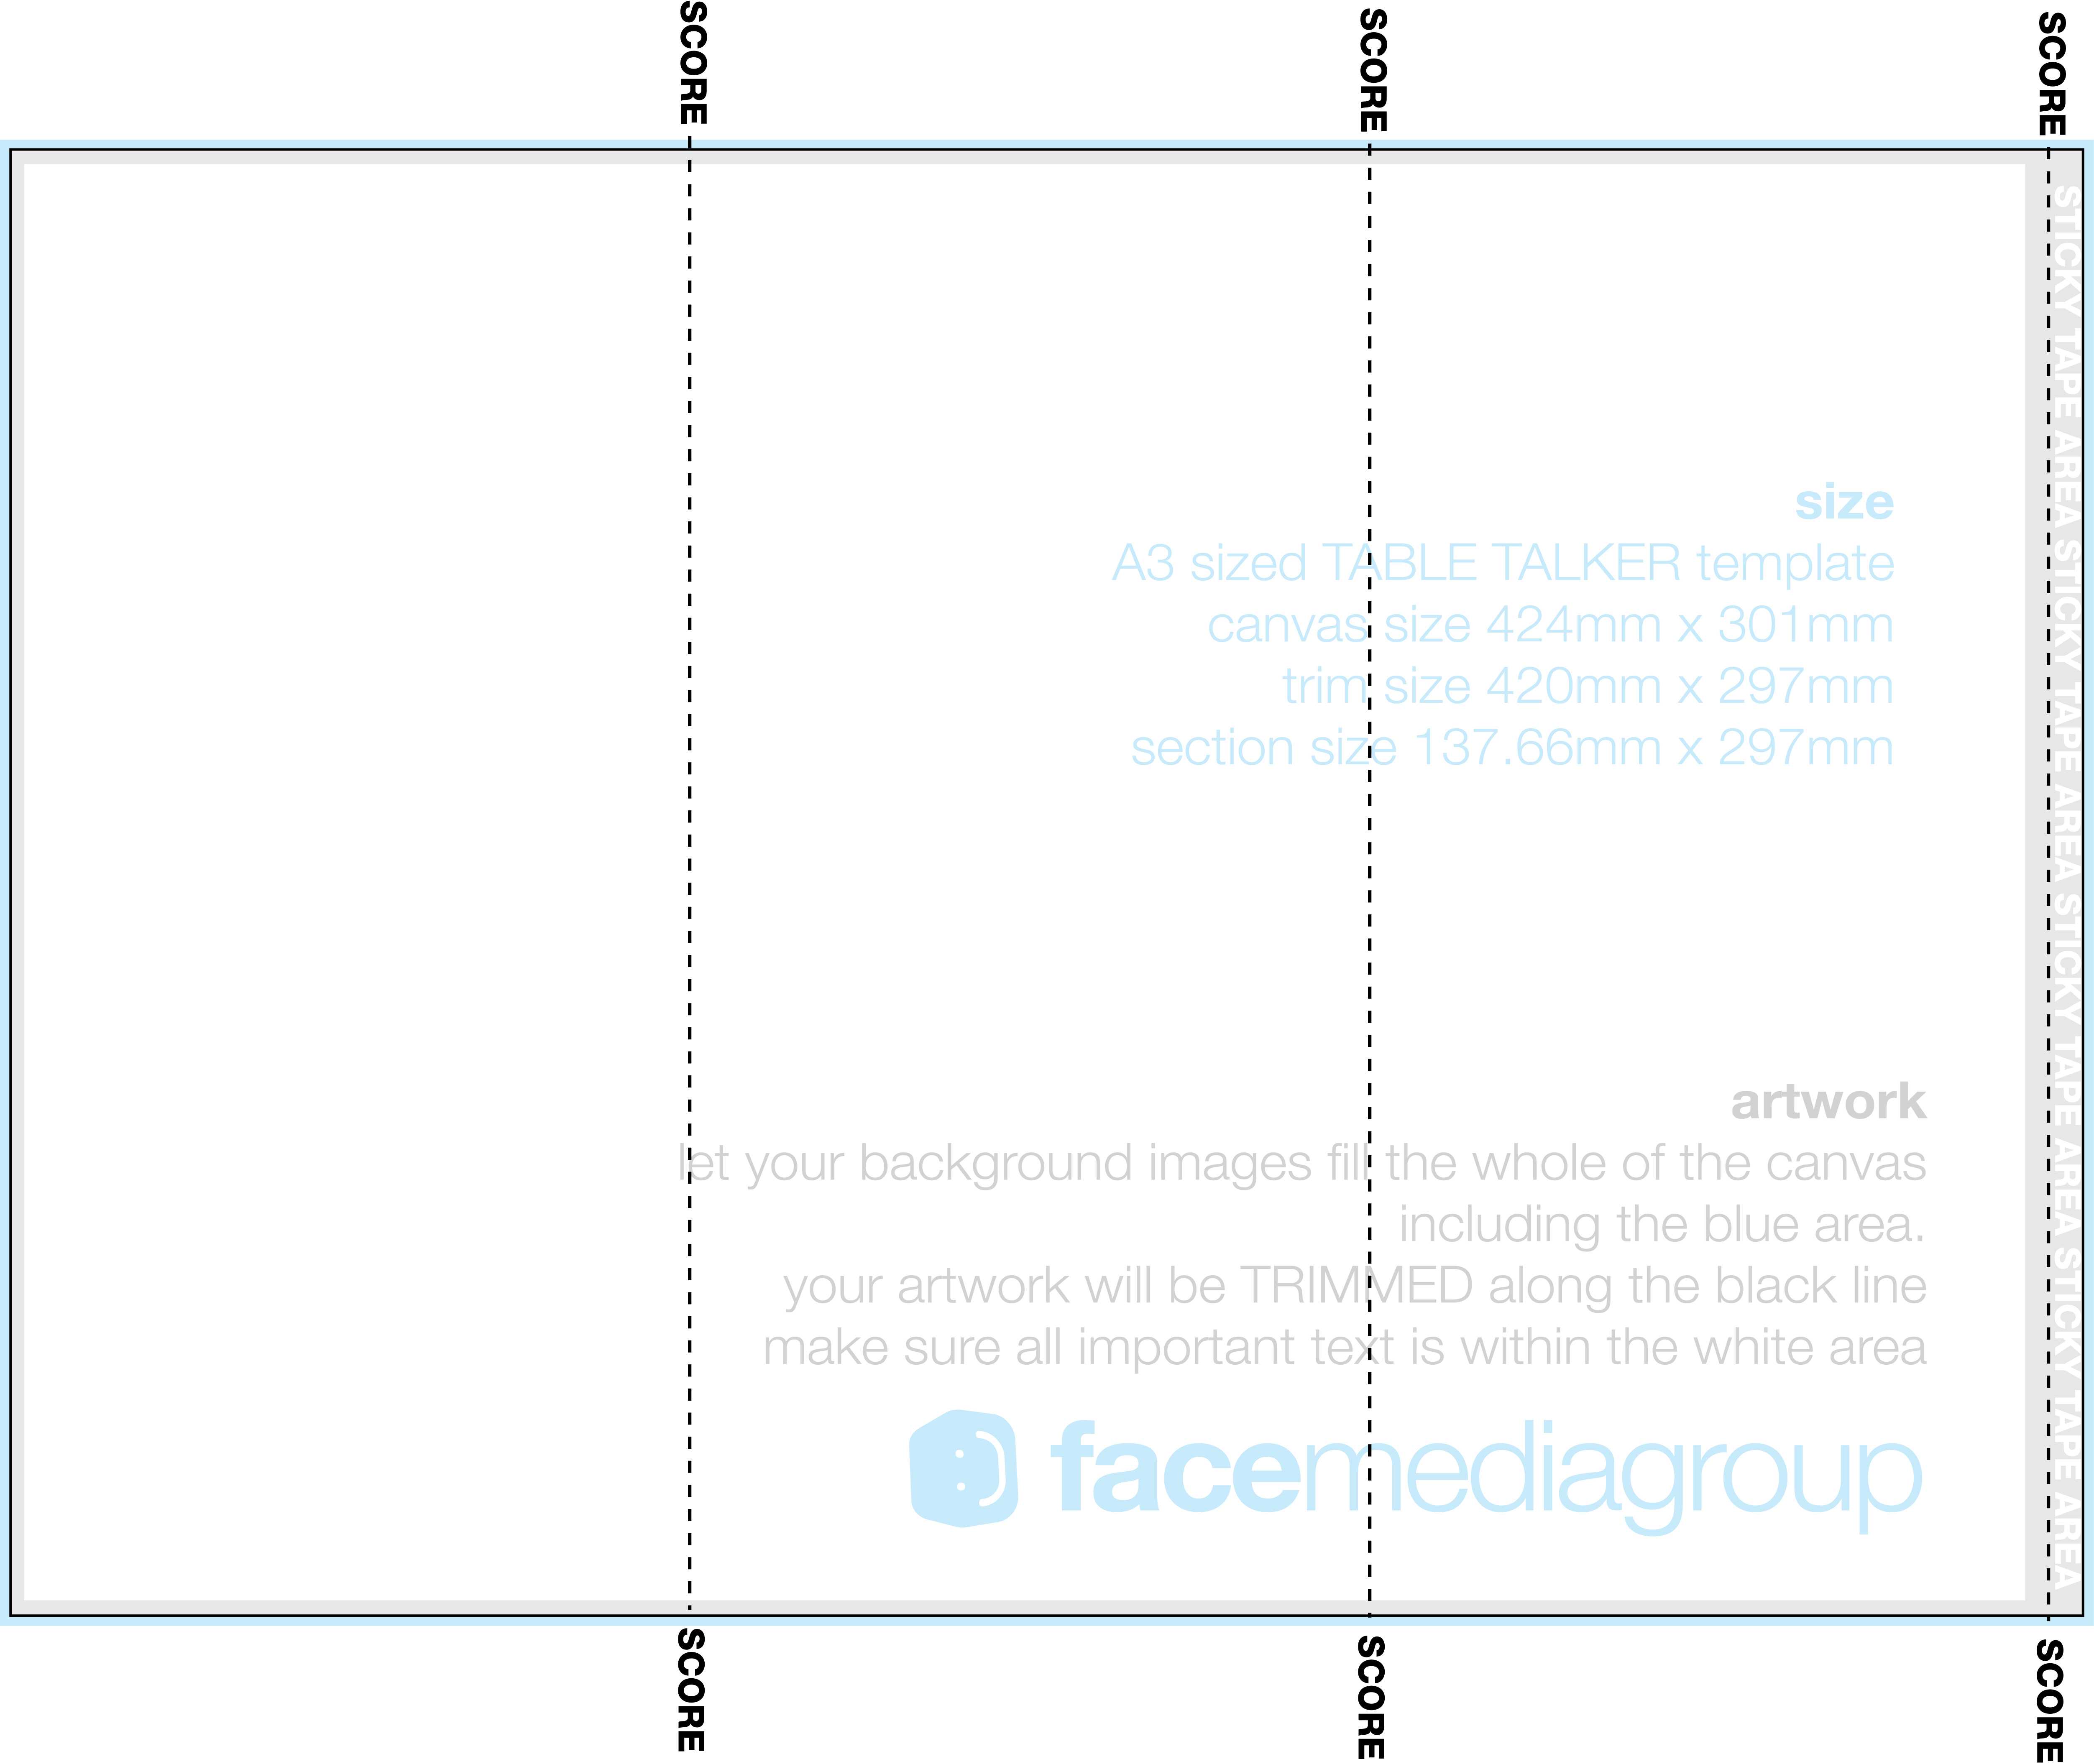 A3 Tri Fold Table Talker Template | Photo Page - Everystockphoto With Regard To Tri Fold Tent Card Template